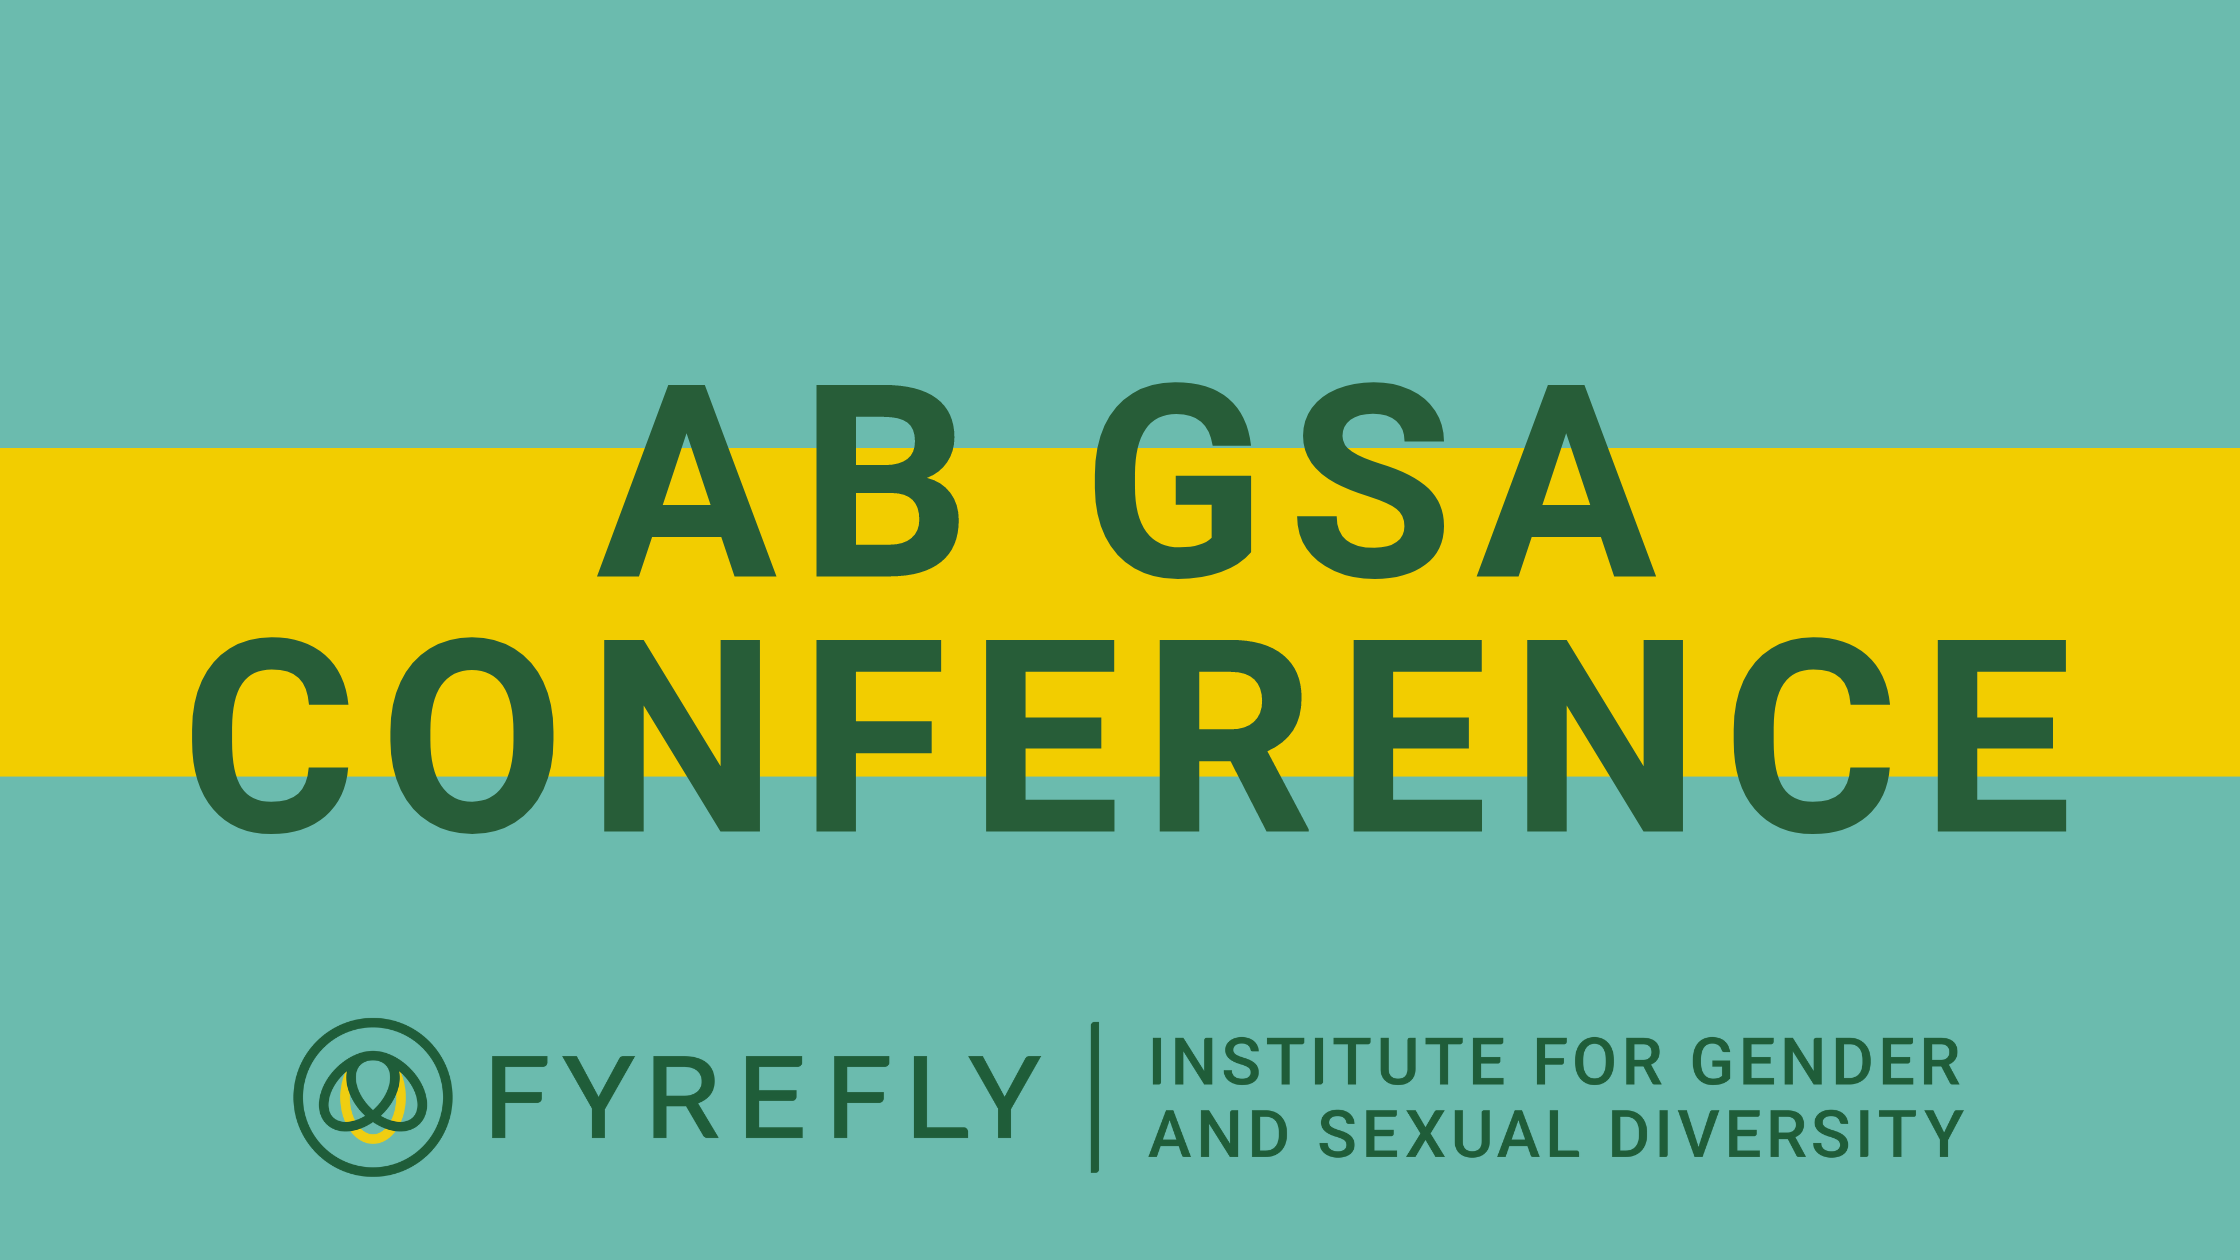 AB GSA Conference in dark green text, against a yellow rectangle, which is against a turquoise background that says Fyrefly Institute for Gender and Sexual Diversity